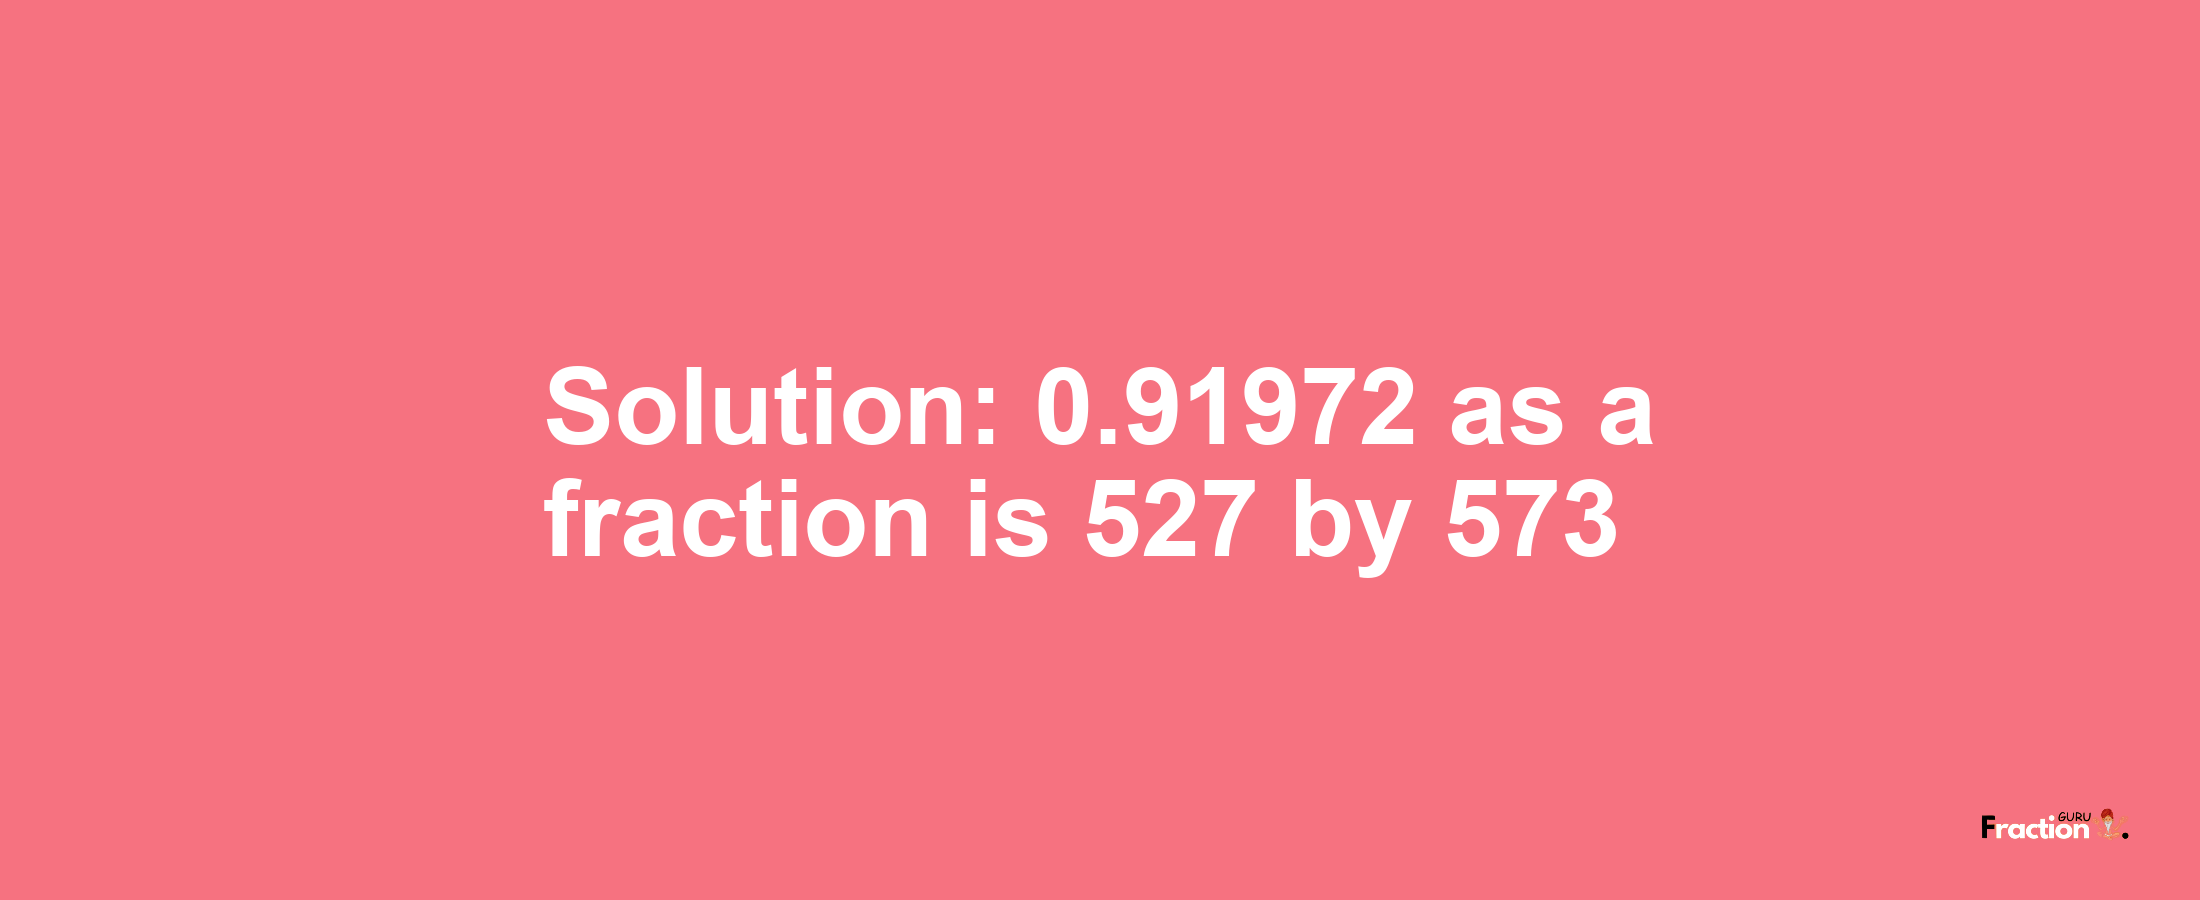 Solution:0.91972 as a fraction is 527/573